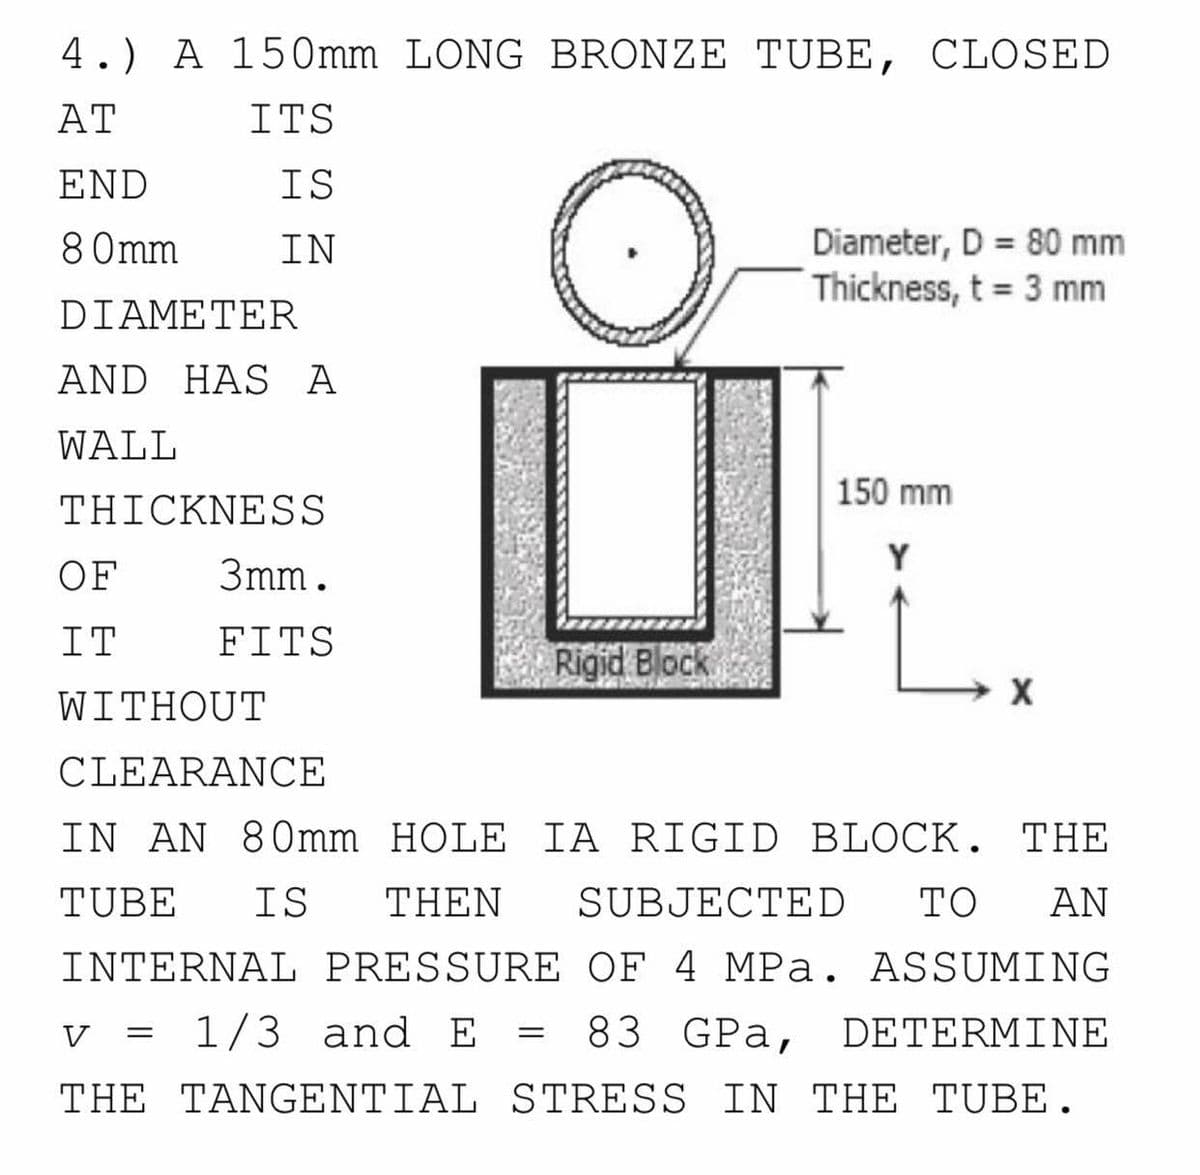 4.) A 150mm LONG BRONZE TUBE, CLOSED
AT
ITS
END
IS
Diameter, D = 80 mm
Thickness, t = 3 mm
8 0mm
IN
DIAMETER
AND HAS A
WALL
150 mm
THICKNESS
Y
OF
3mm.
IT
FITS
Rigid Block
WITHOUT
CLEARANCE
IN AN 80mm HOLE IA RIGID BLOCK. THE
TUBE
IS
THEN
SUBJECTED
TO
AN
INTERNAL PRESSURE OF 4 MPa. ASSUMING
V
v = 1/3 and E =
83 GPa,
DETERMINE
THE TANGENTIAL STRESS IN THE TUBE.
